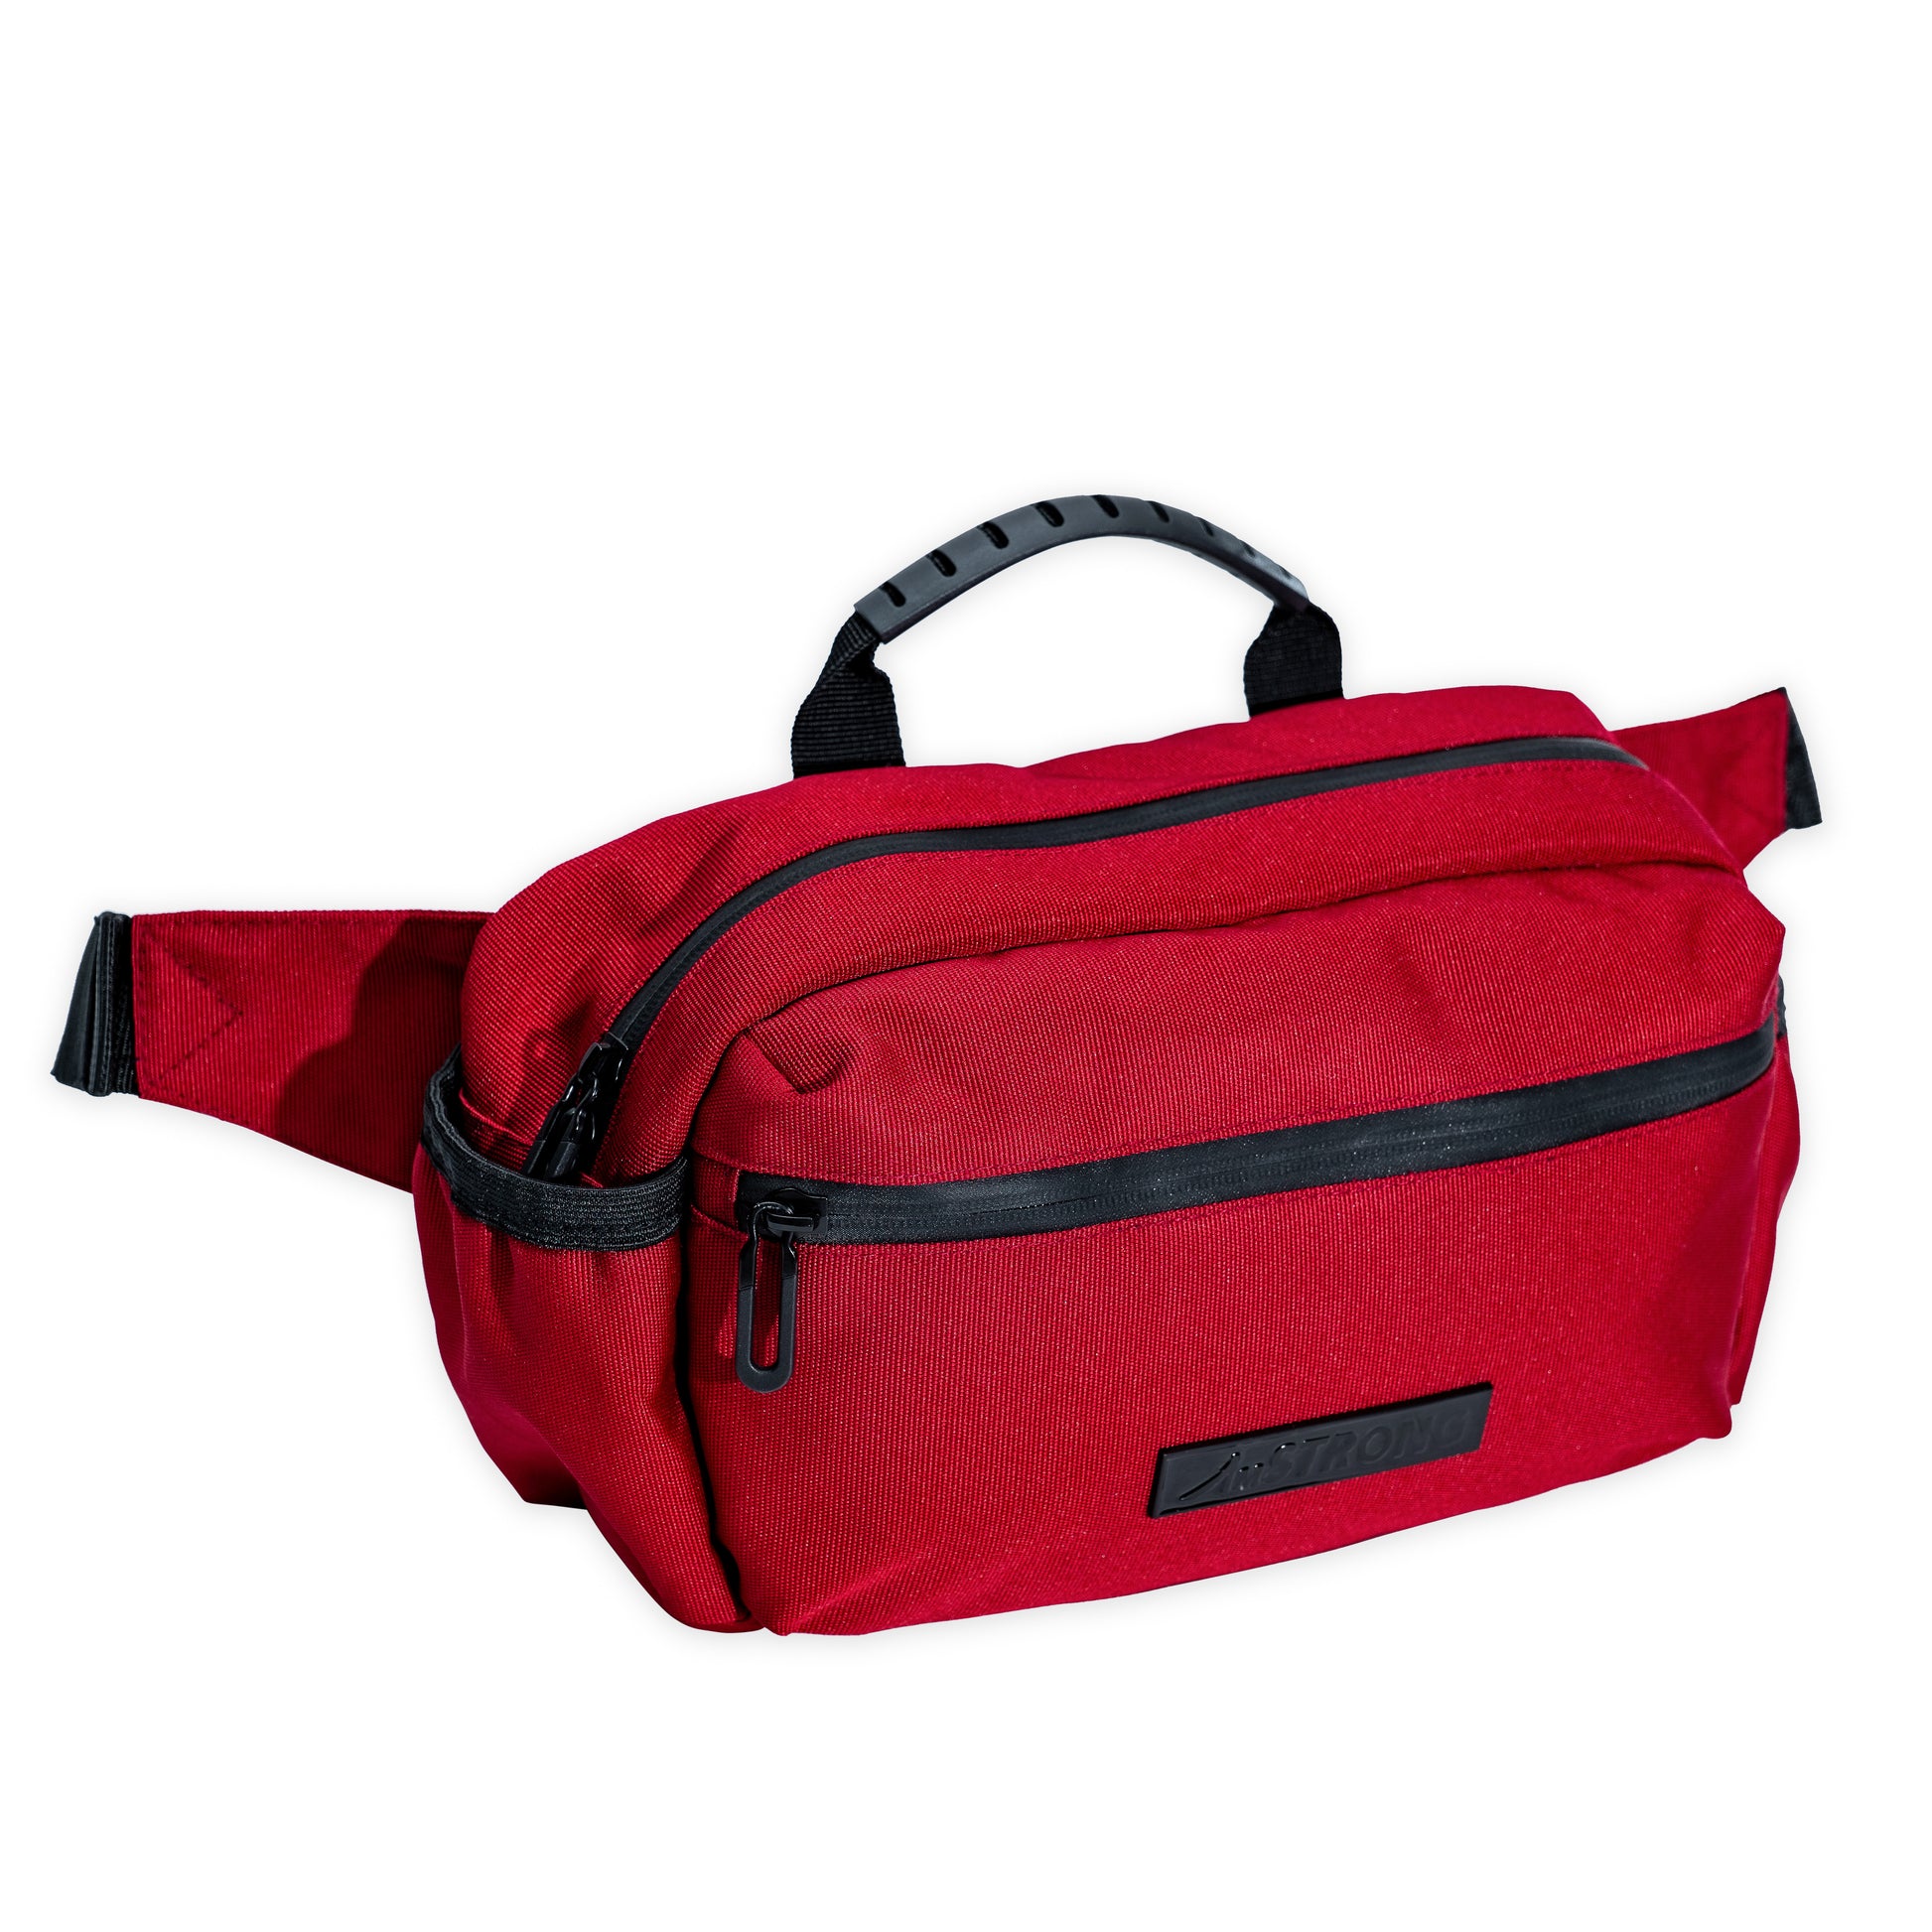 AmSTRONG red belt bag with black trims and a metallic label